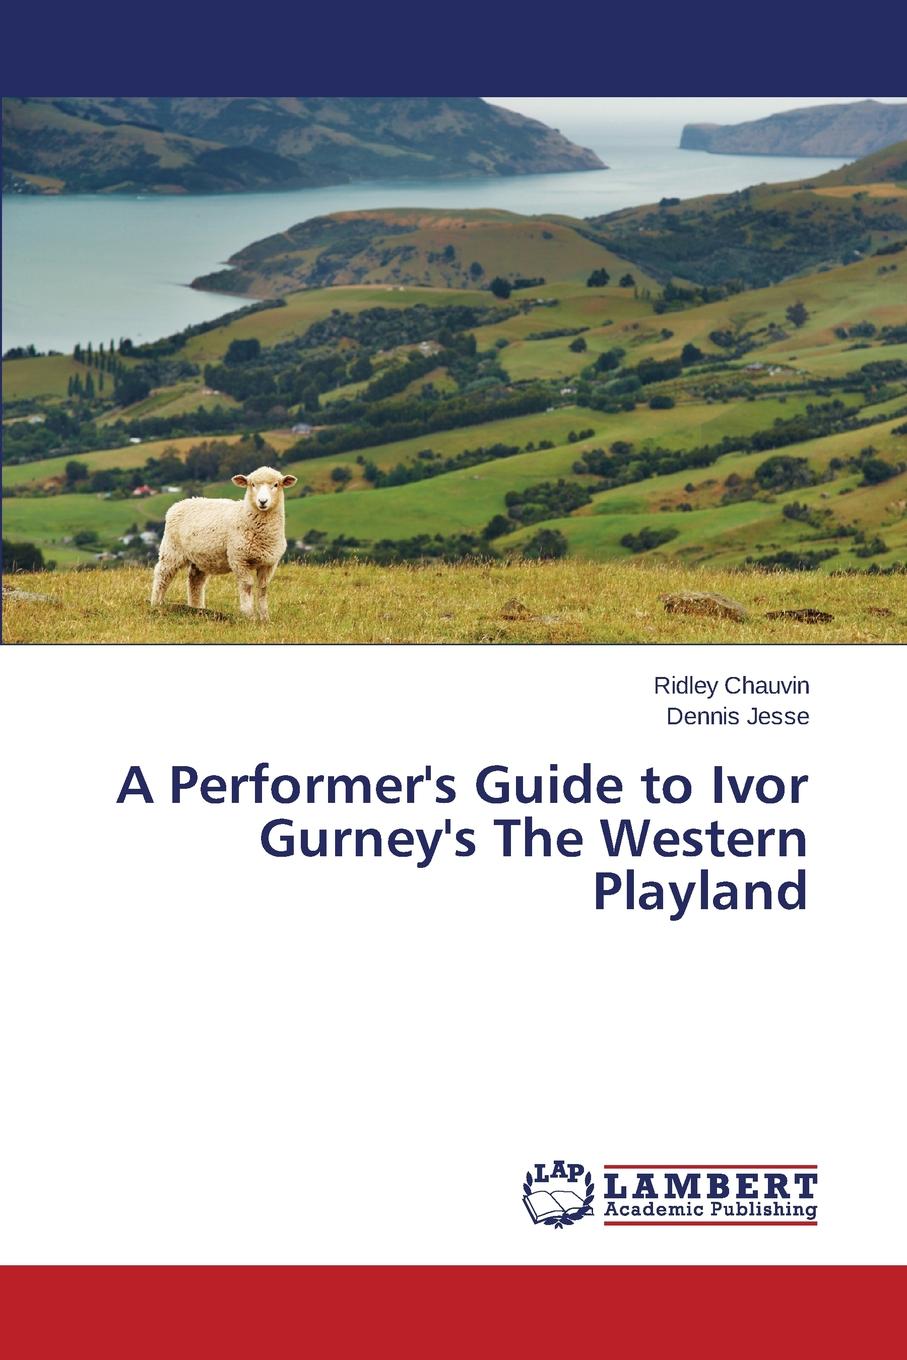 A Performer.s Guide to Ivor Gurney.s The Western Playland